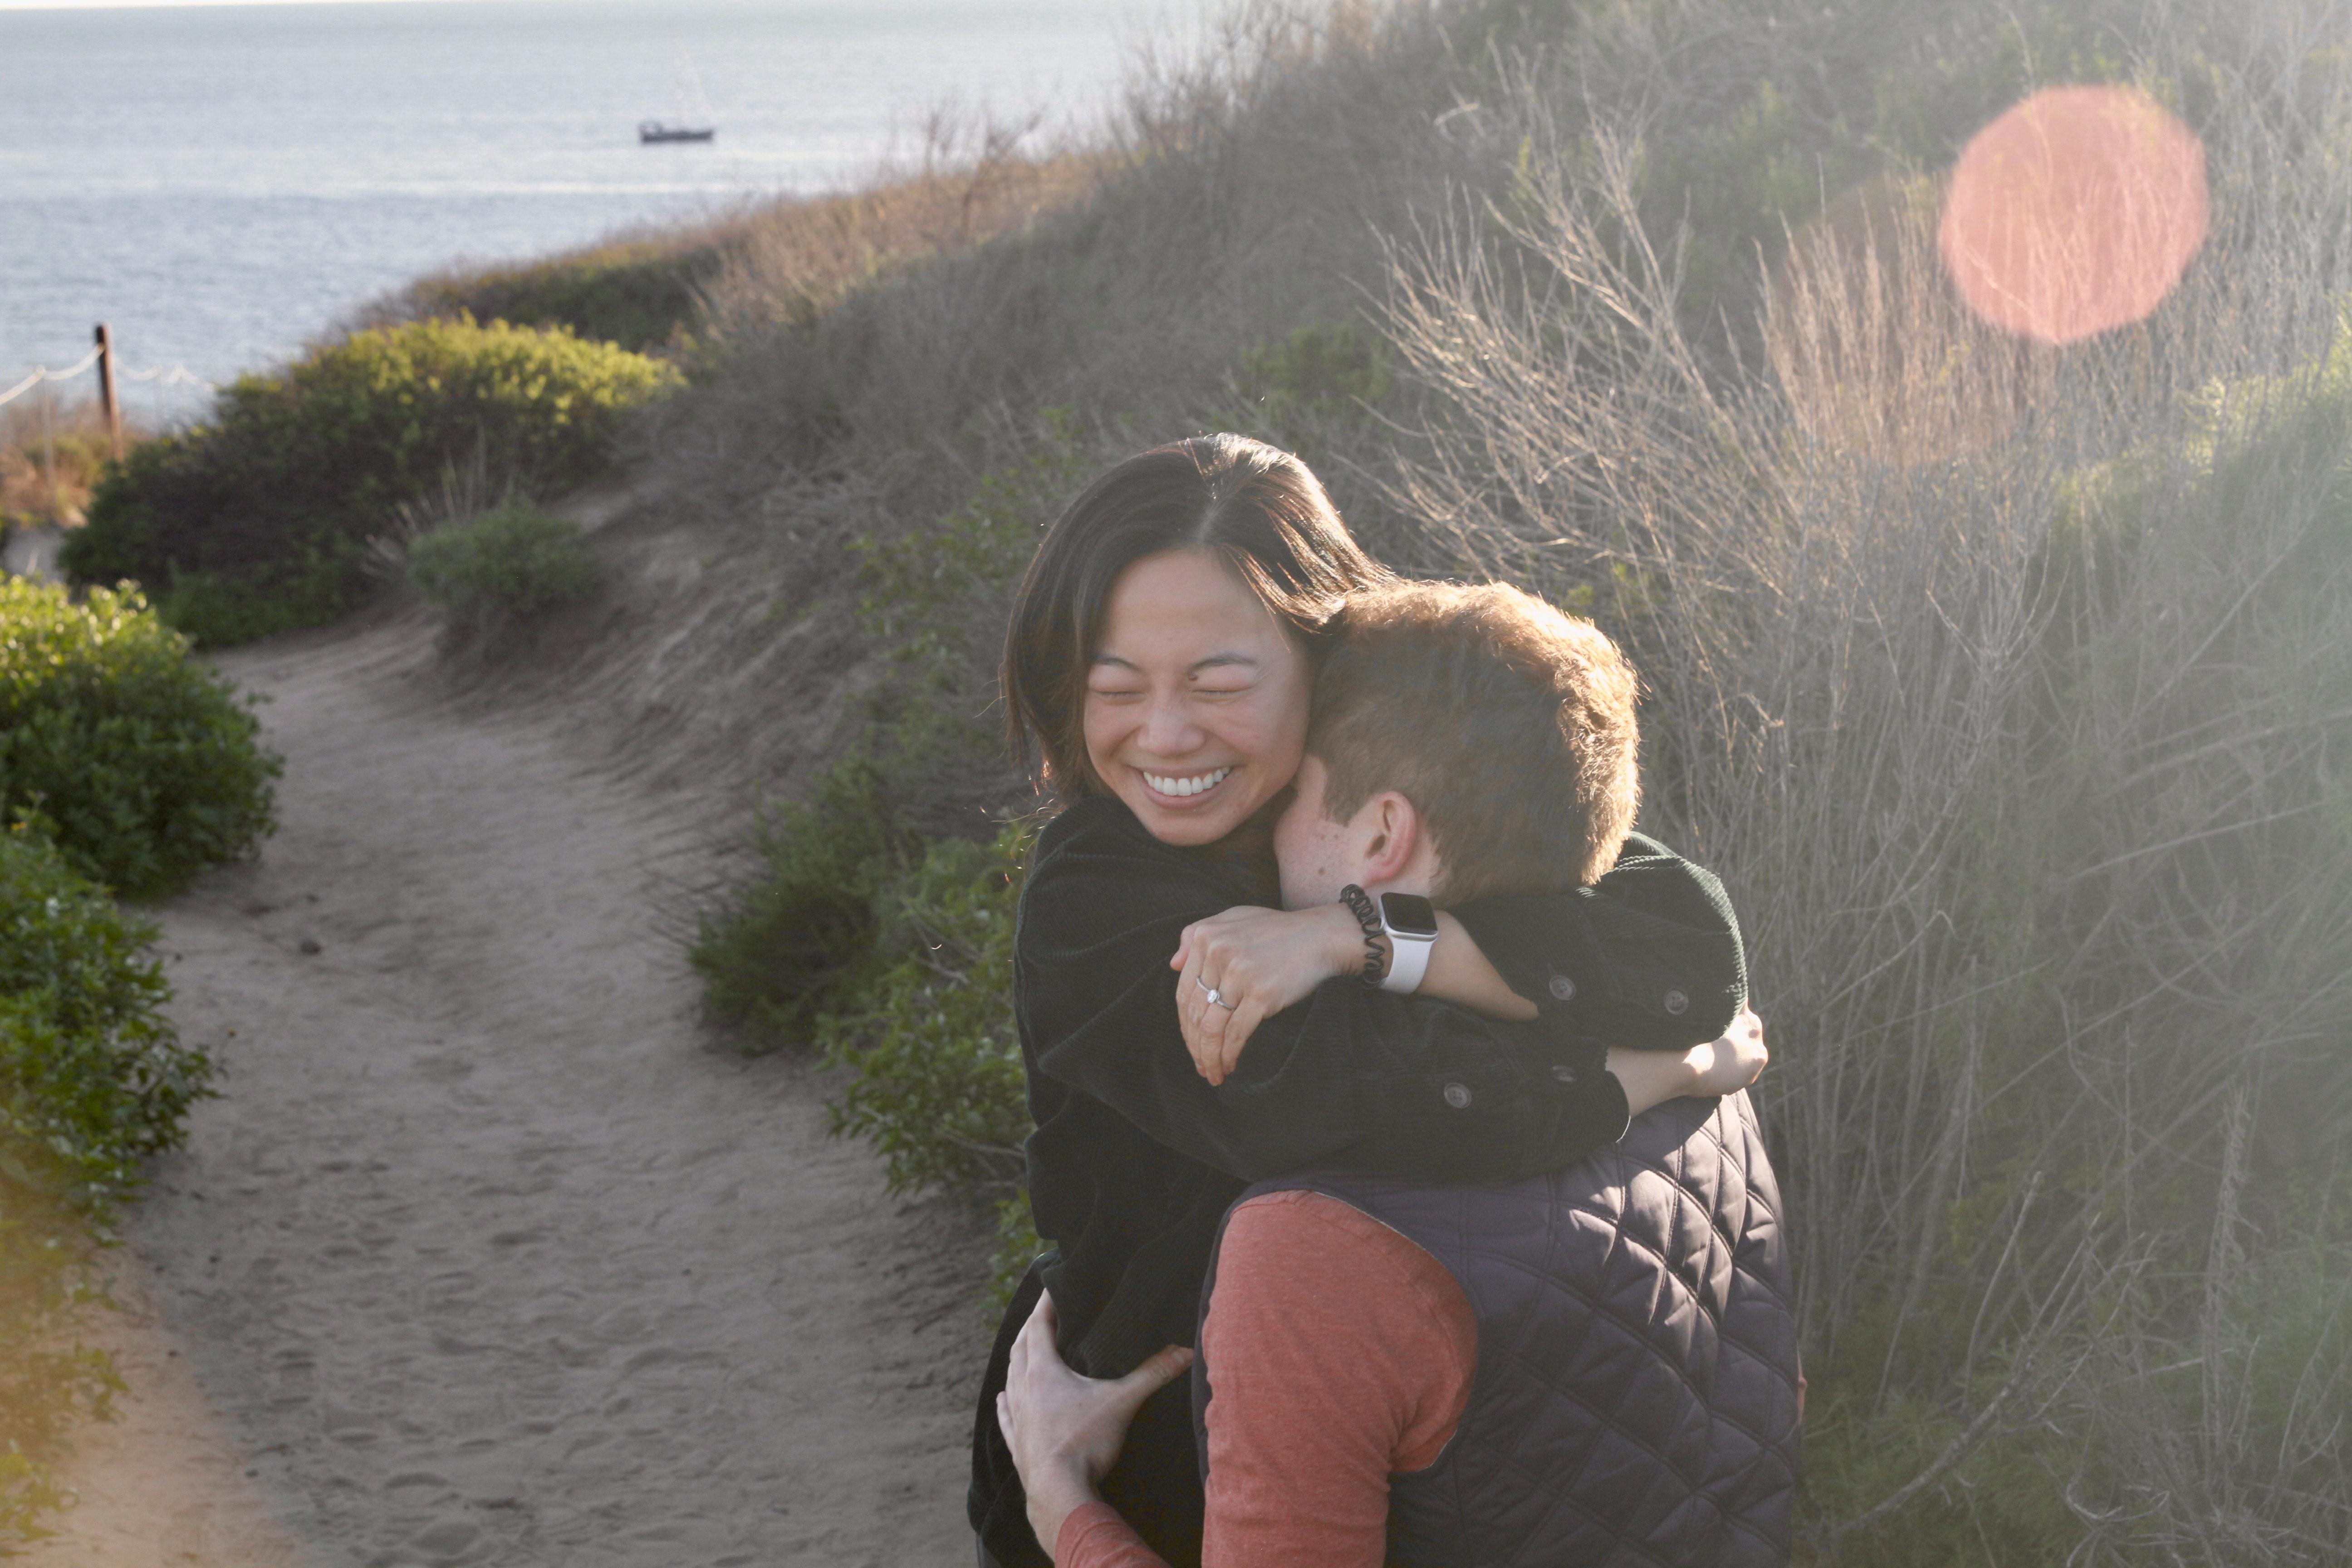 The Wedding Website of Sussy Pan and Matthew Fitzburgh